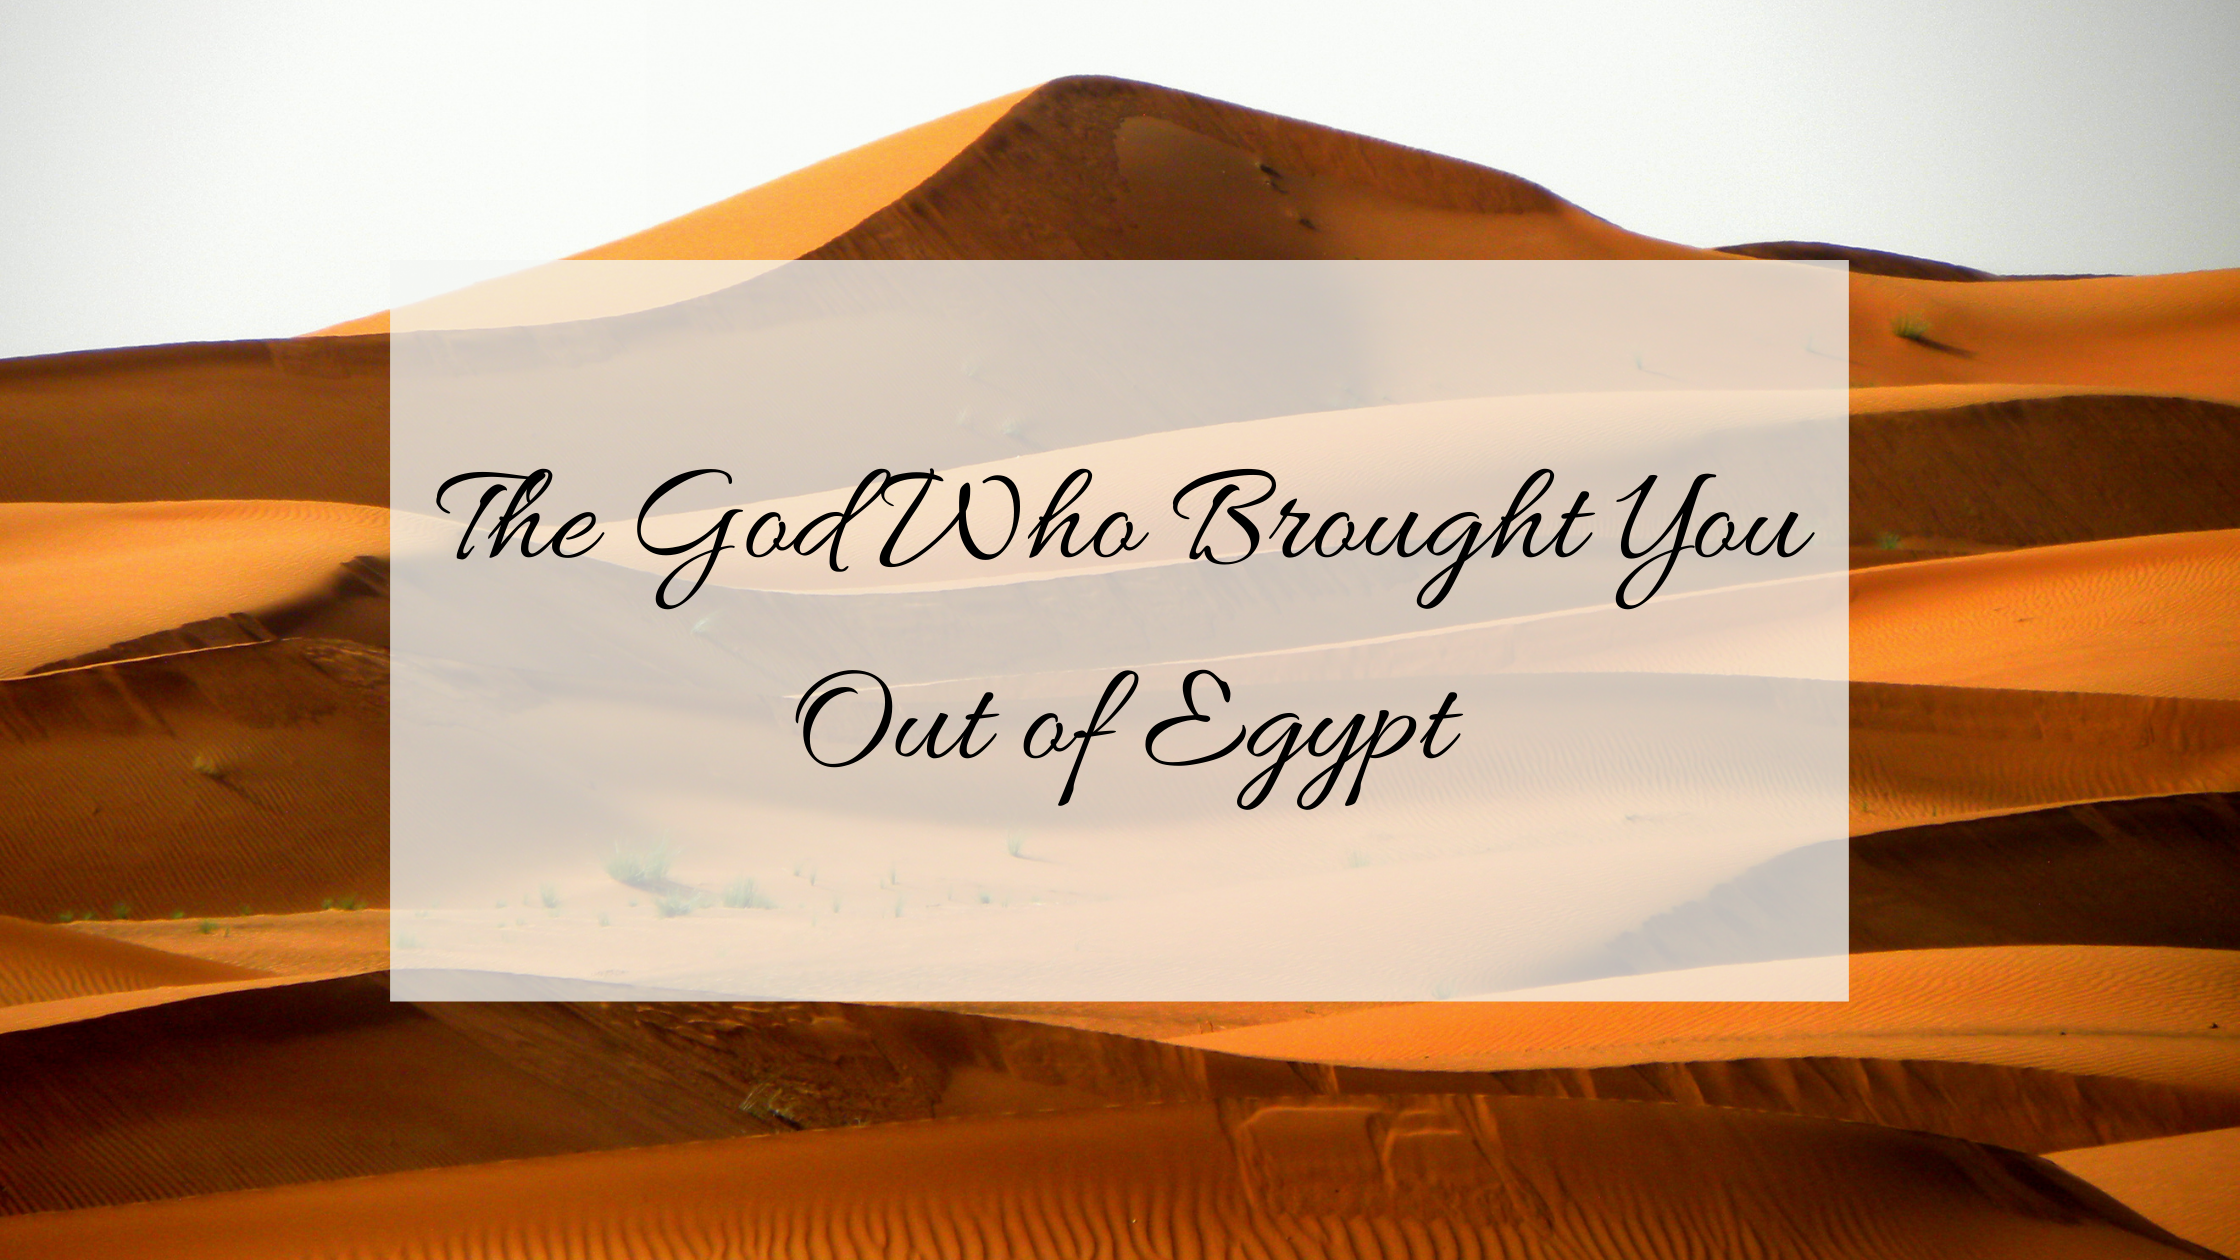 The God Who Brought You Out of Egypt blog title with desert background